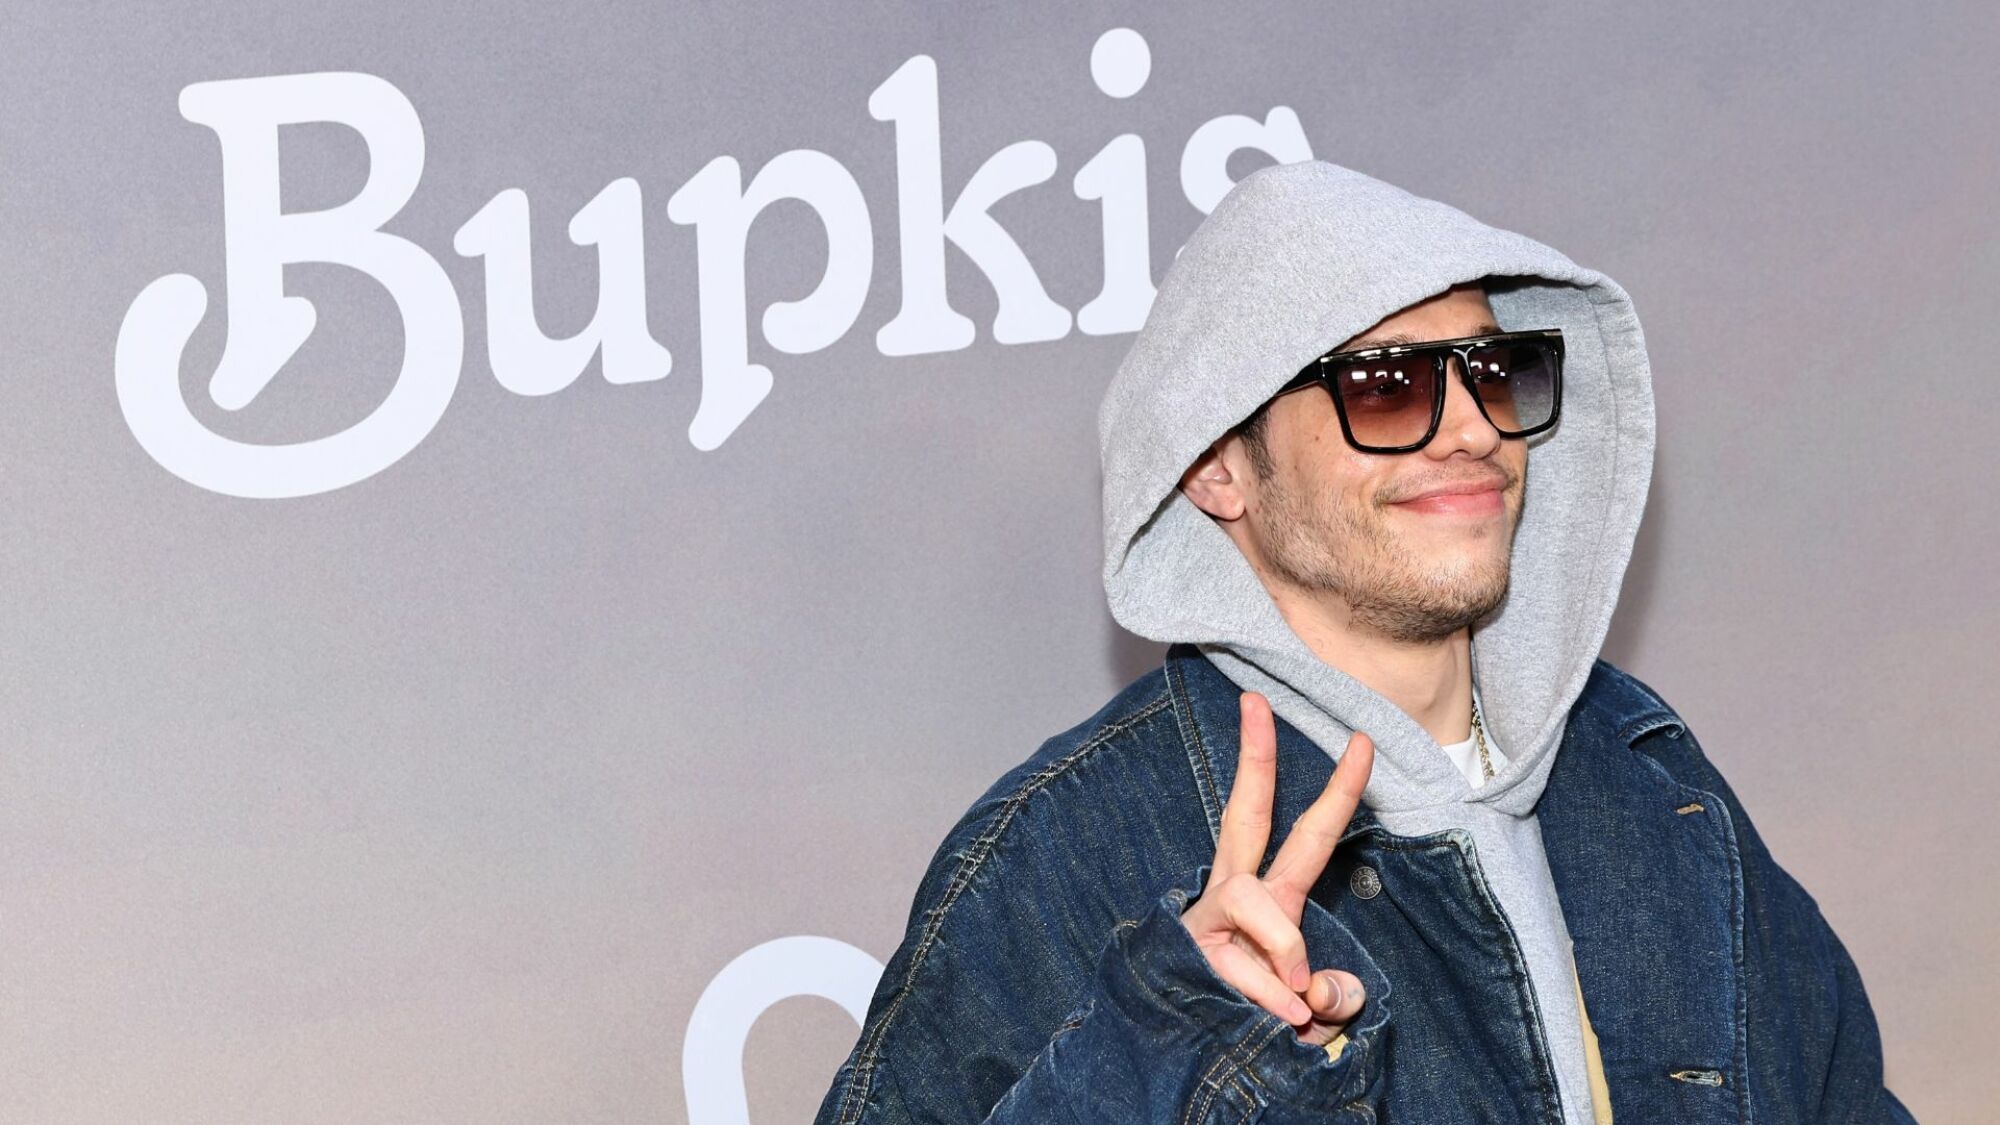 Pete Davidson attends the Peacock's "Bupkis" World Premiere at The Apollo Theater in New York City